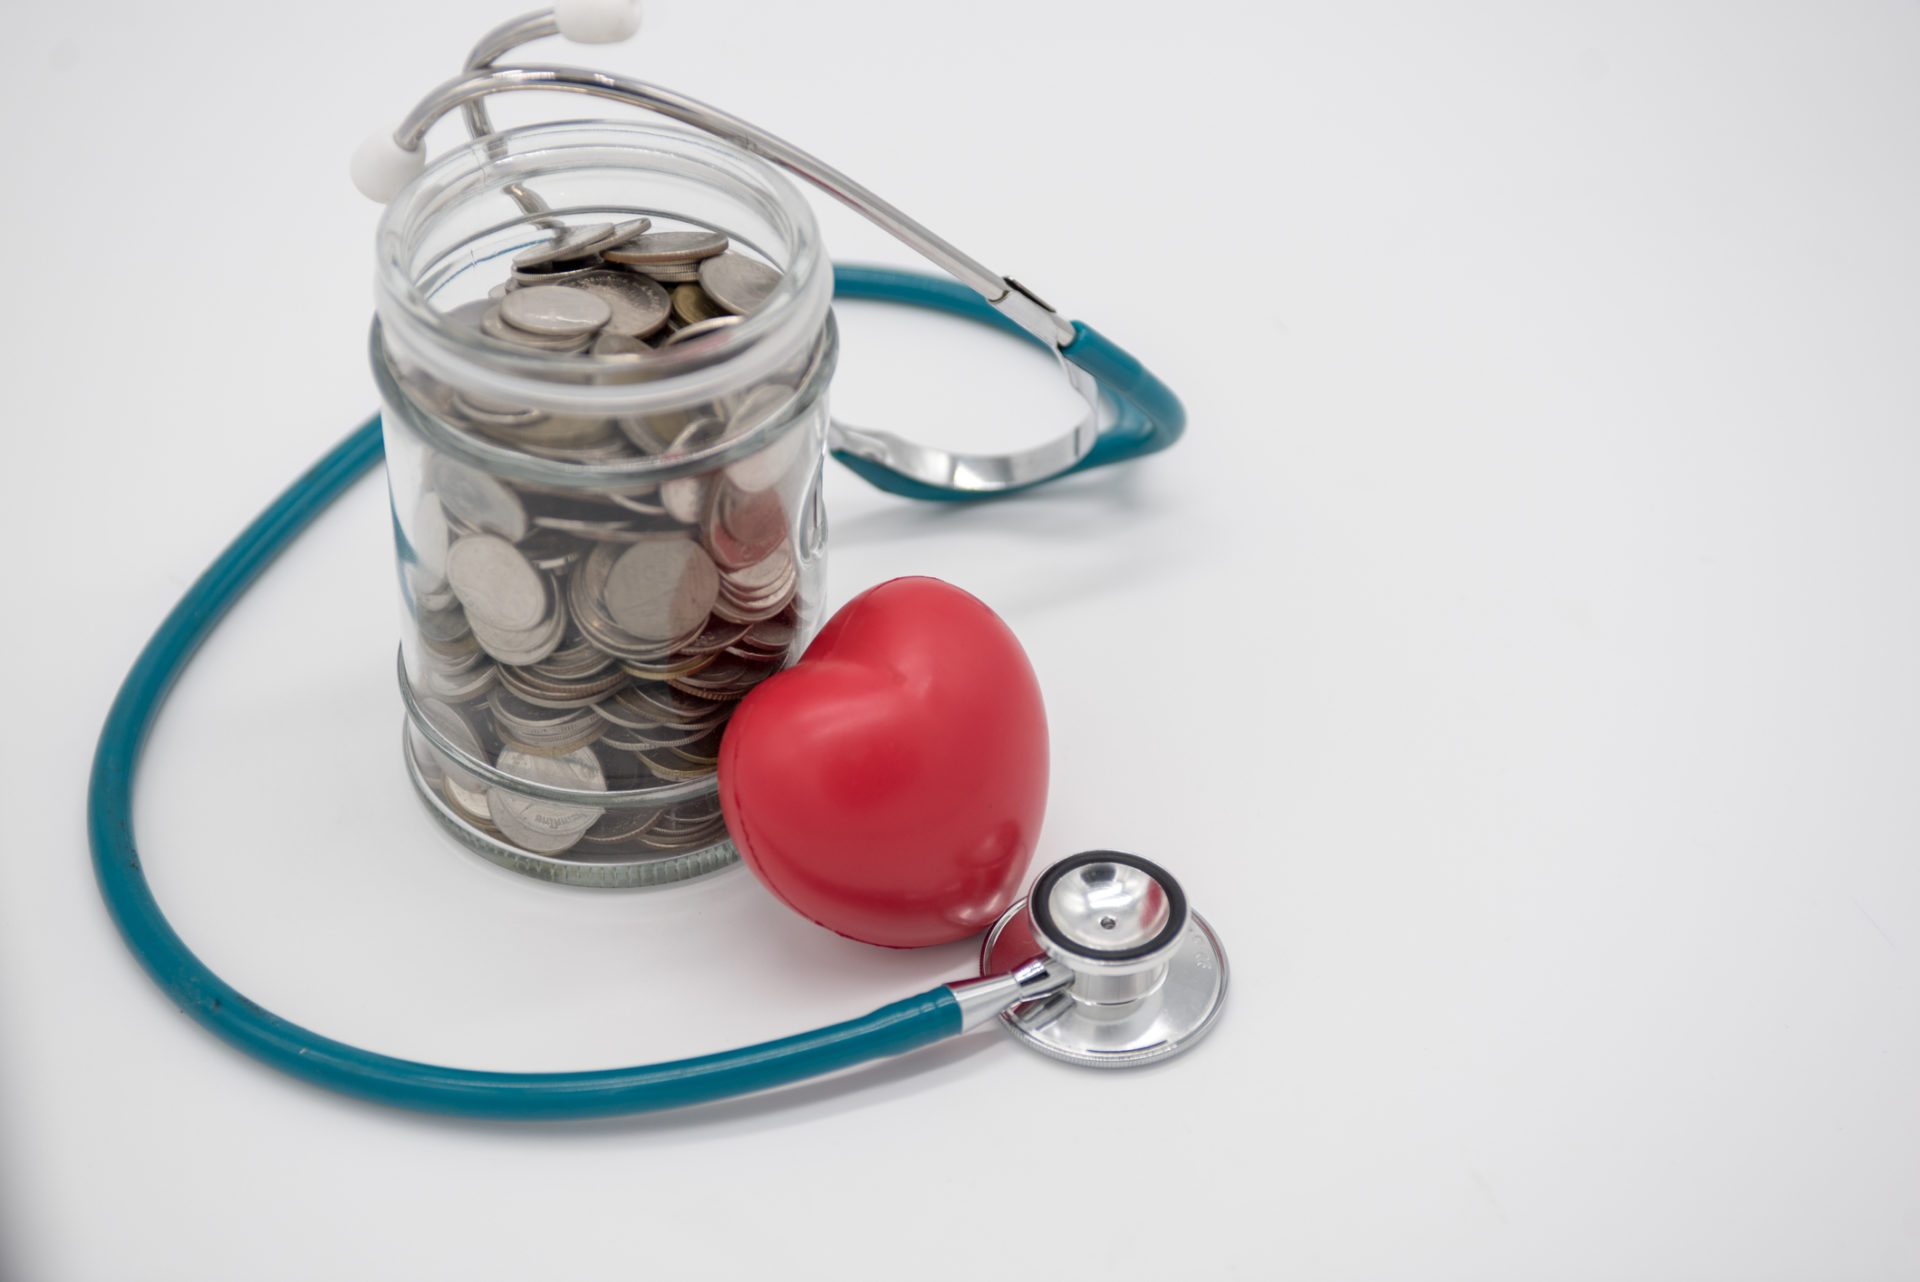 A jar filled with coins enclosed by stethoscope and a small red heart-shaped object placed near a jar.